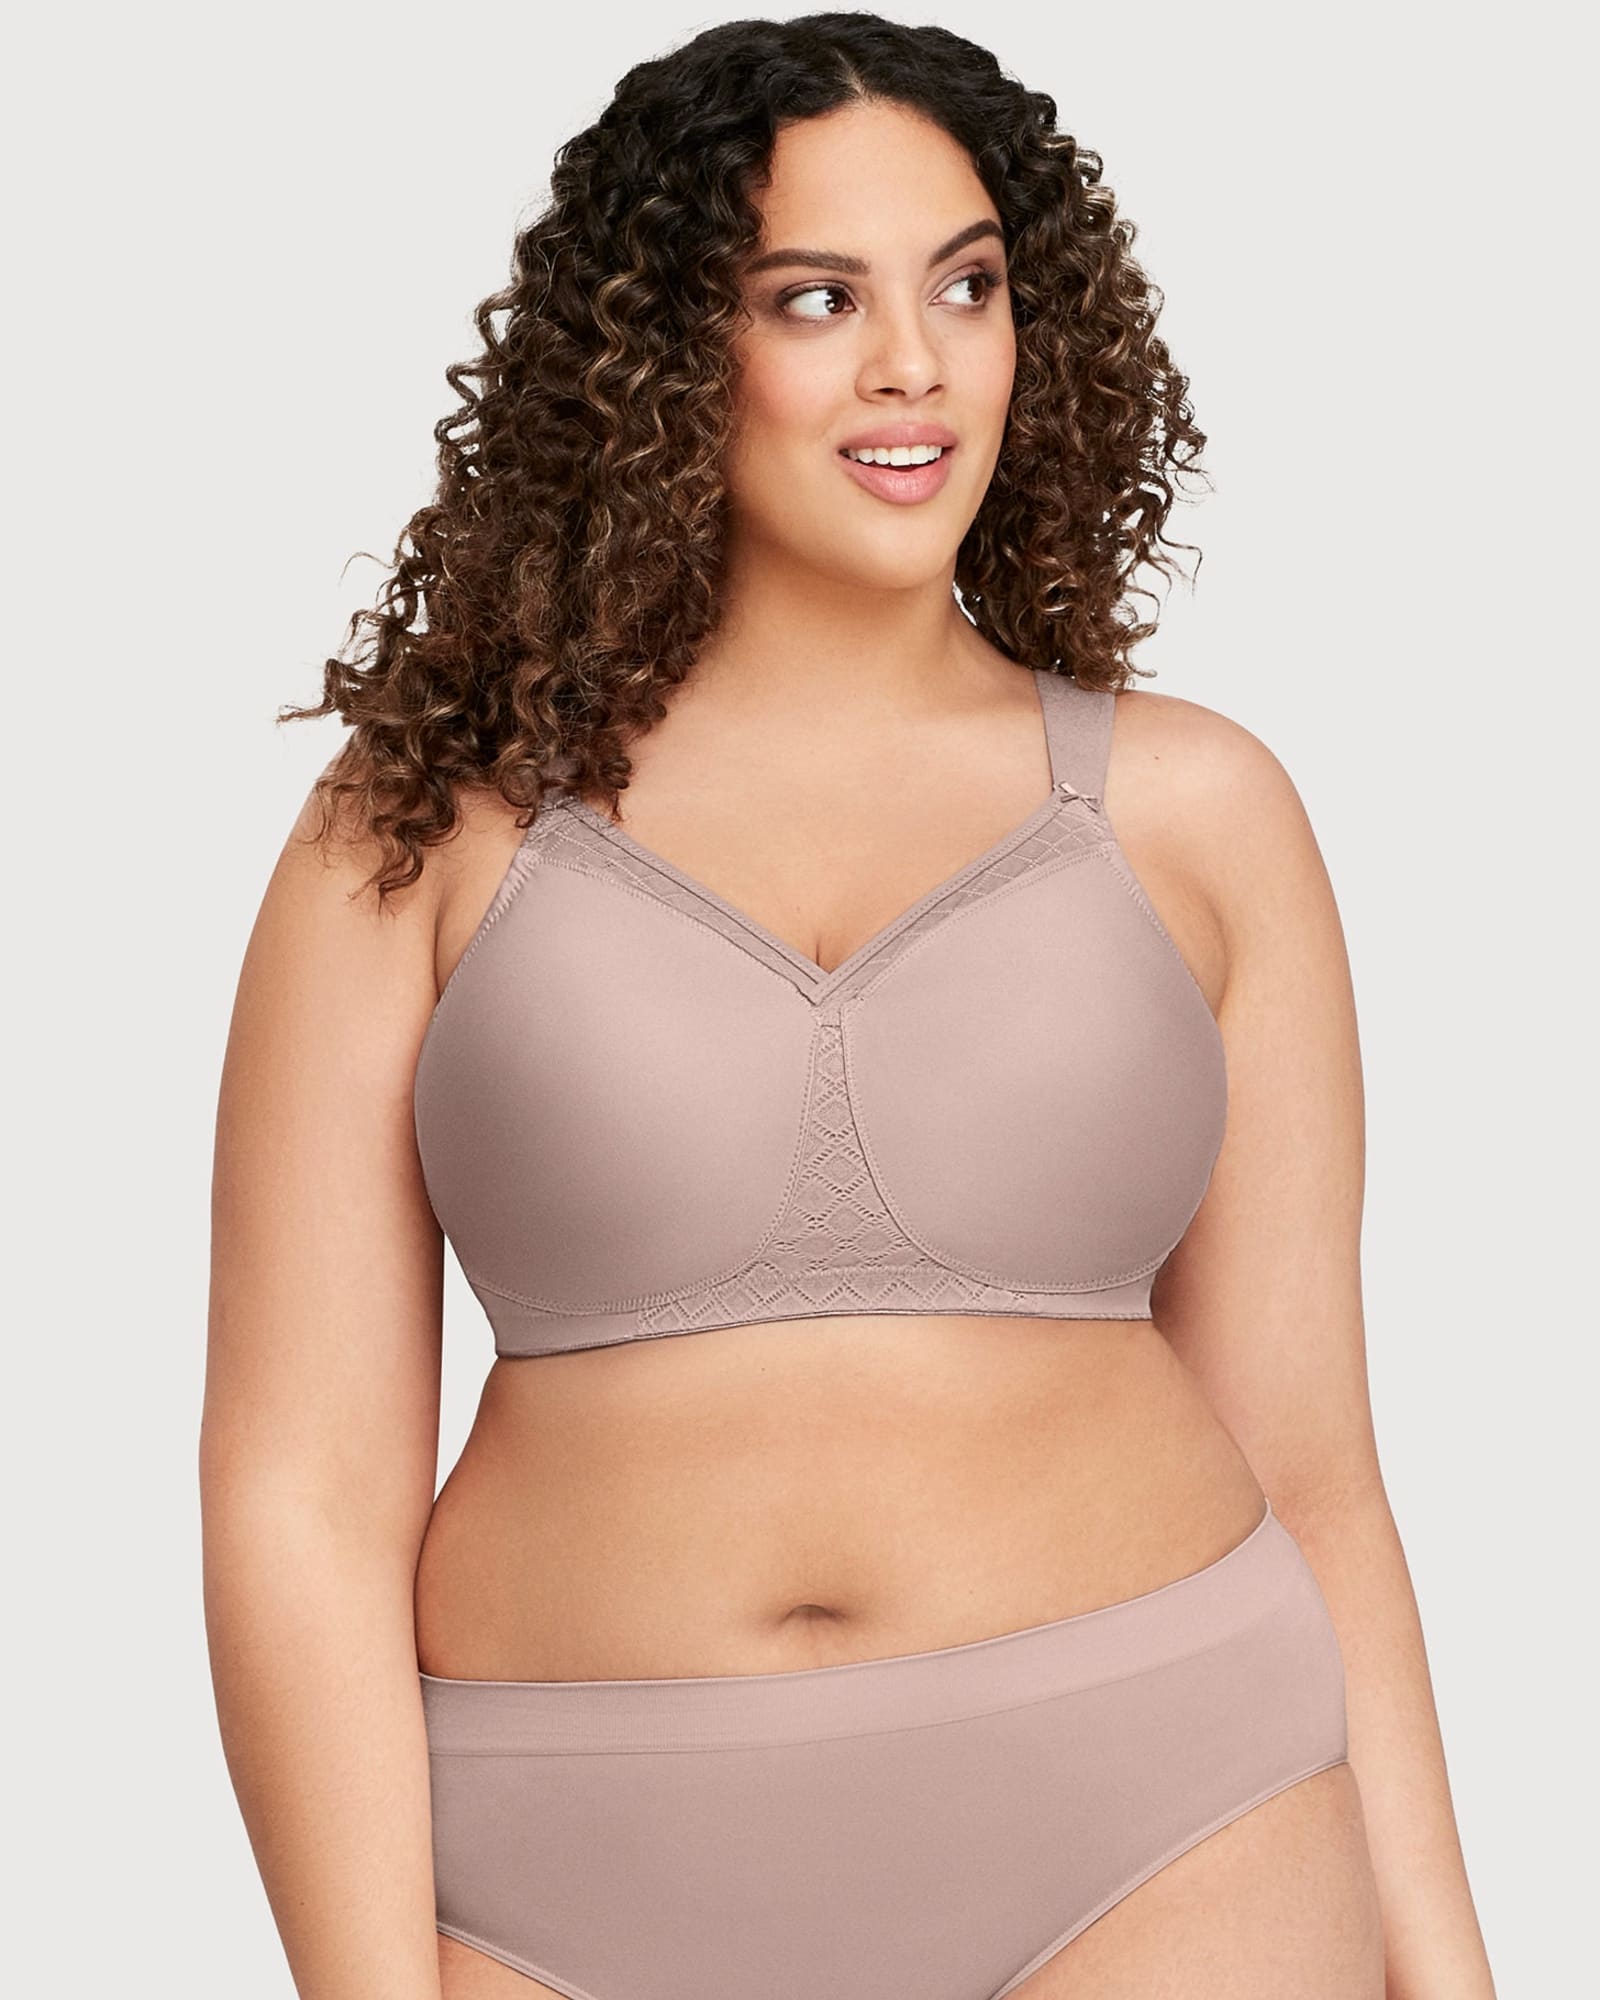 Comfortable Bras For Everyday Wear